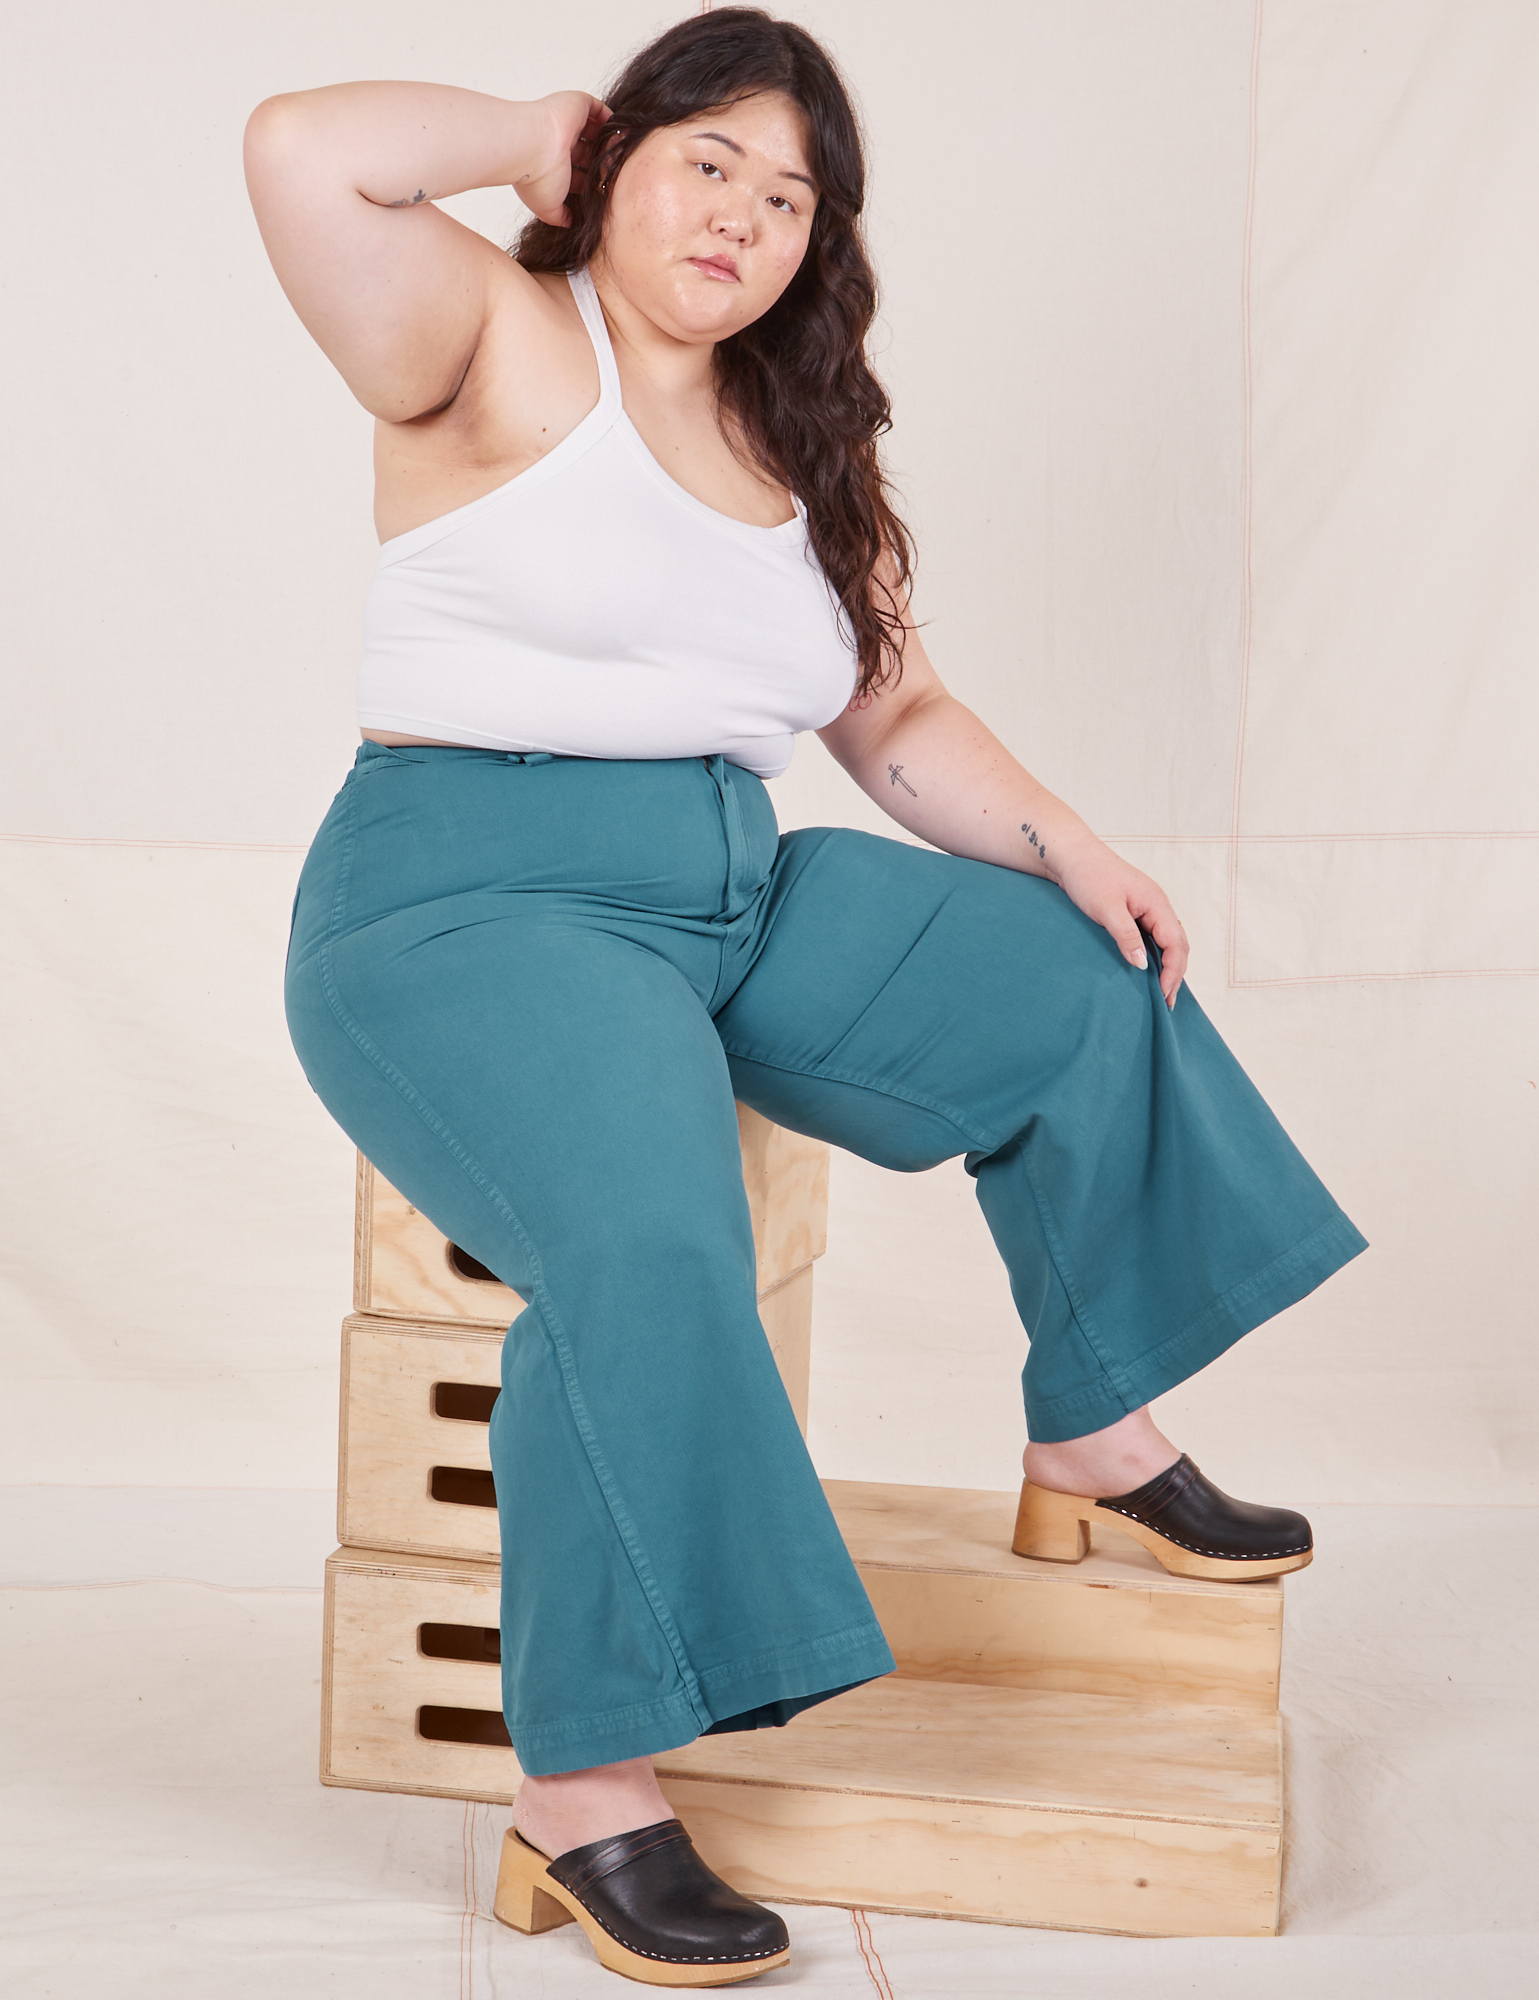 Ashley is sitting on a stack of wooden crates. She is wearing Petite Bell Bottoms in Marine Blue and Halter Top in vintage tee off-white